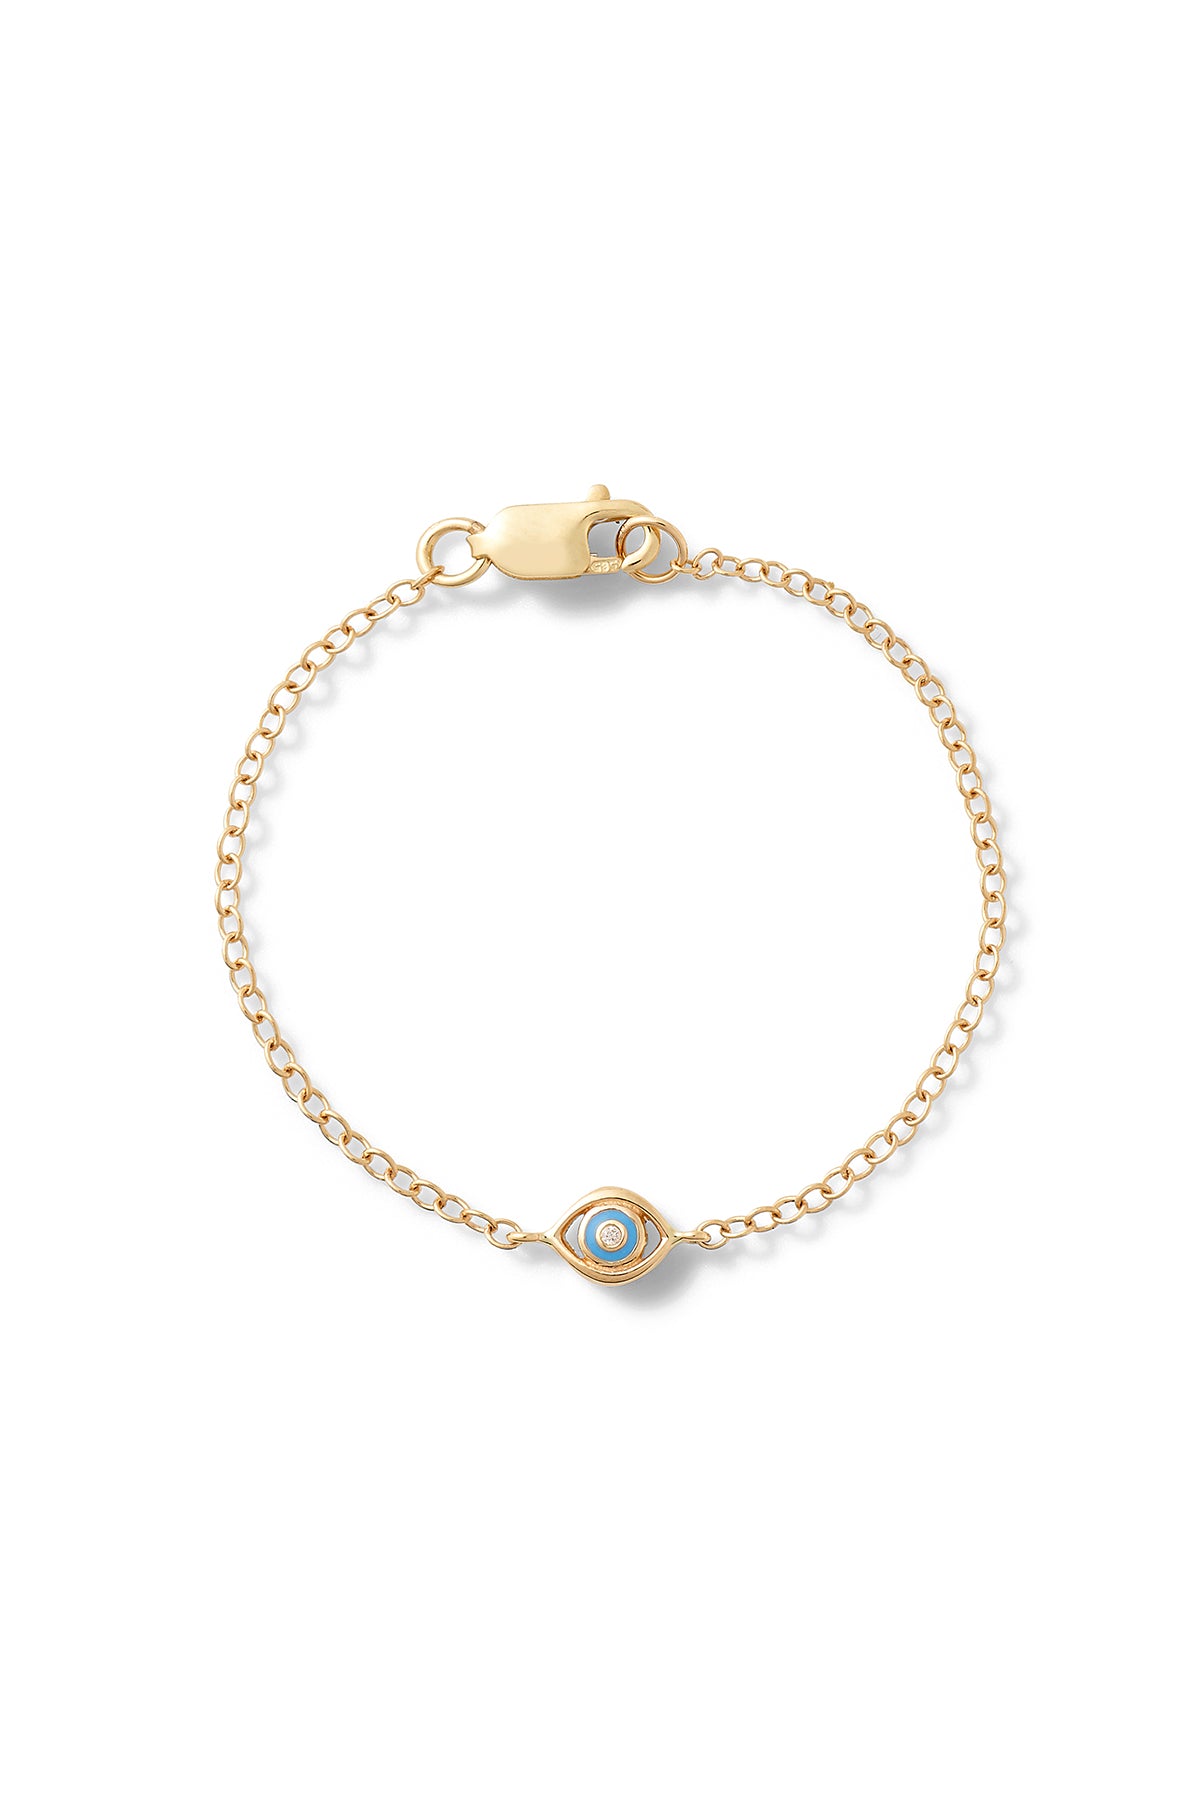 Gold Baby Name Bracelet with Eye